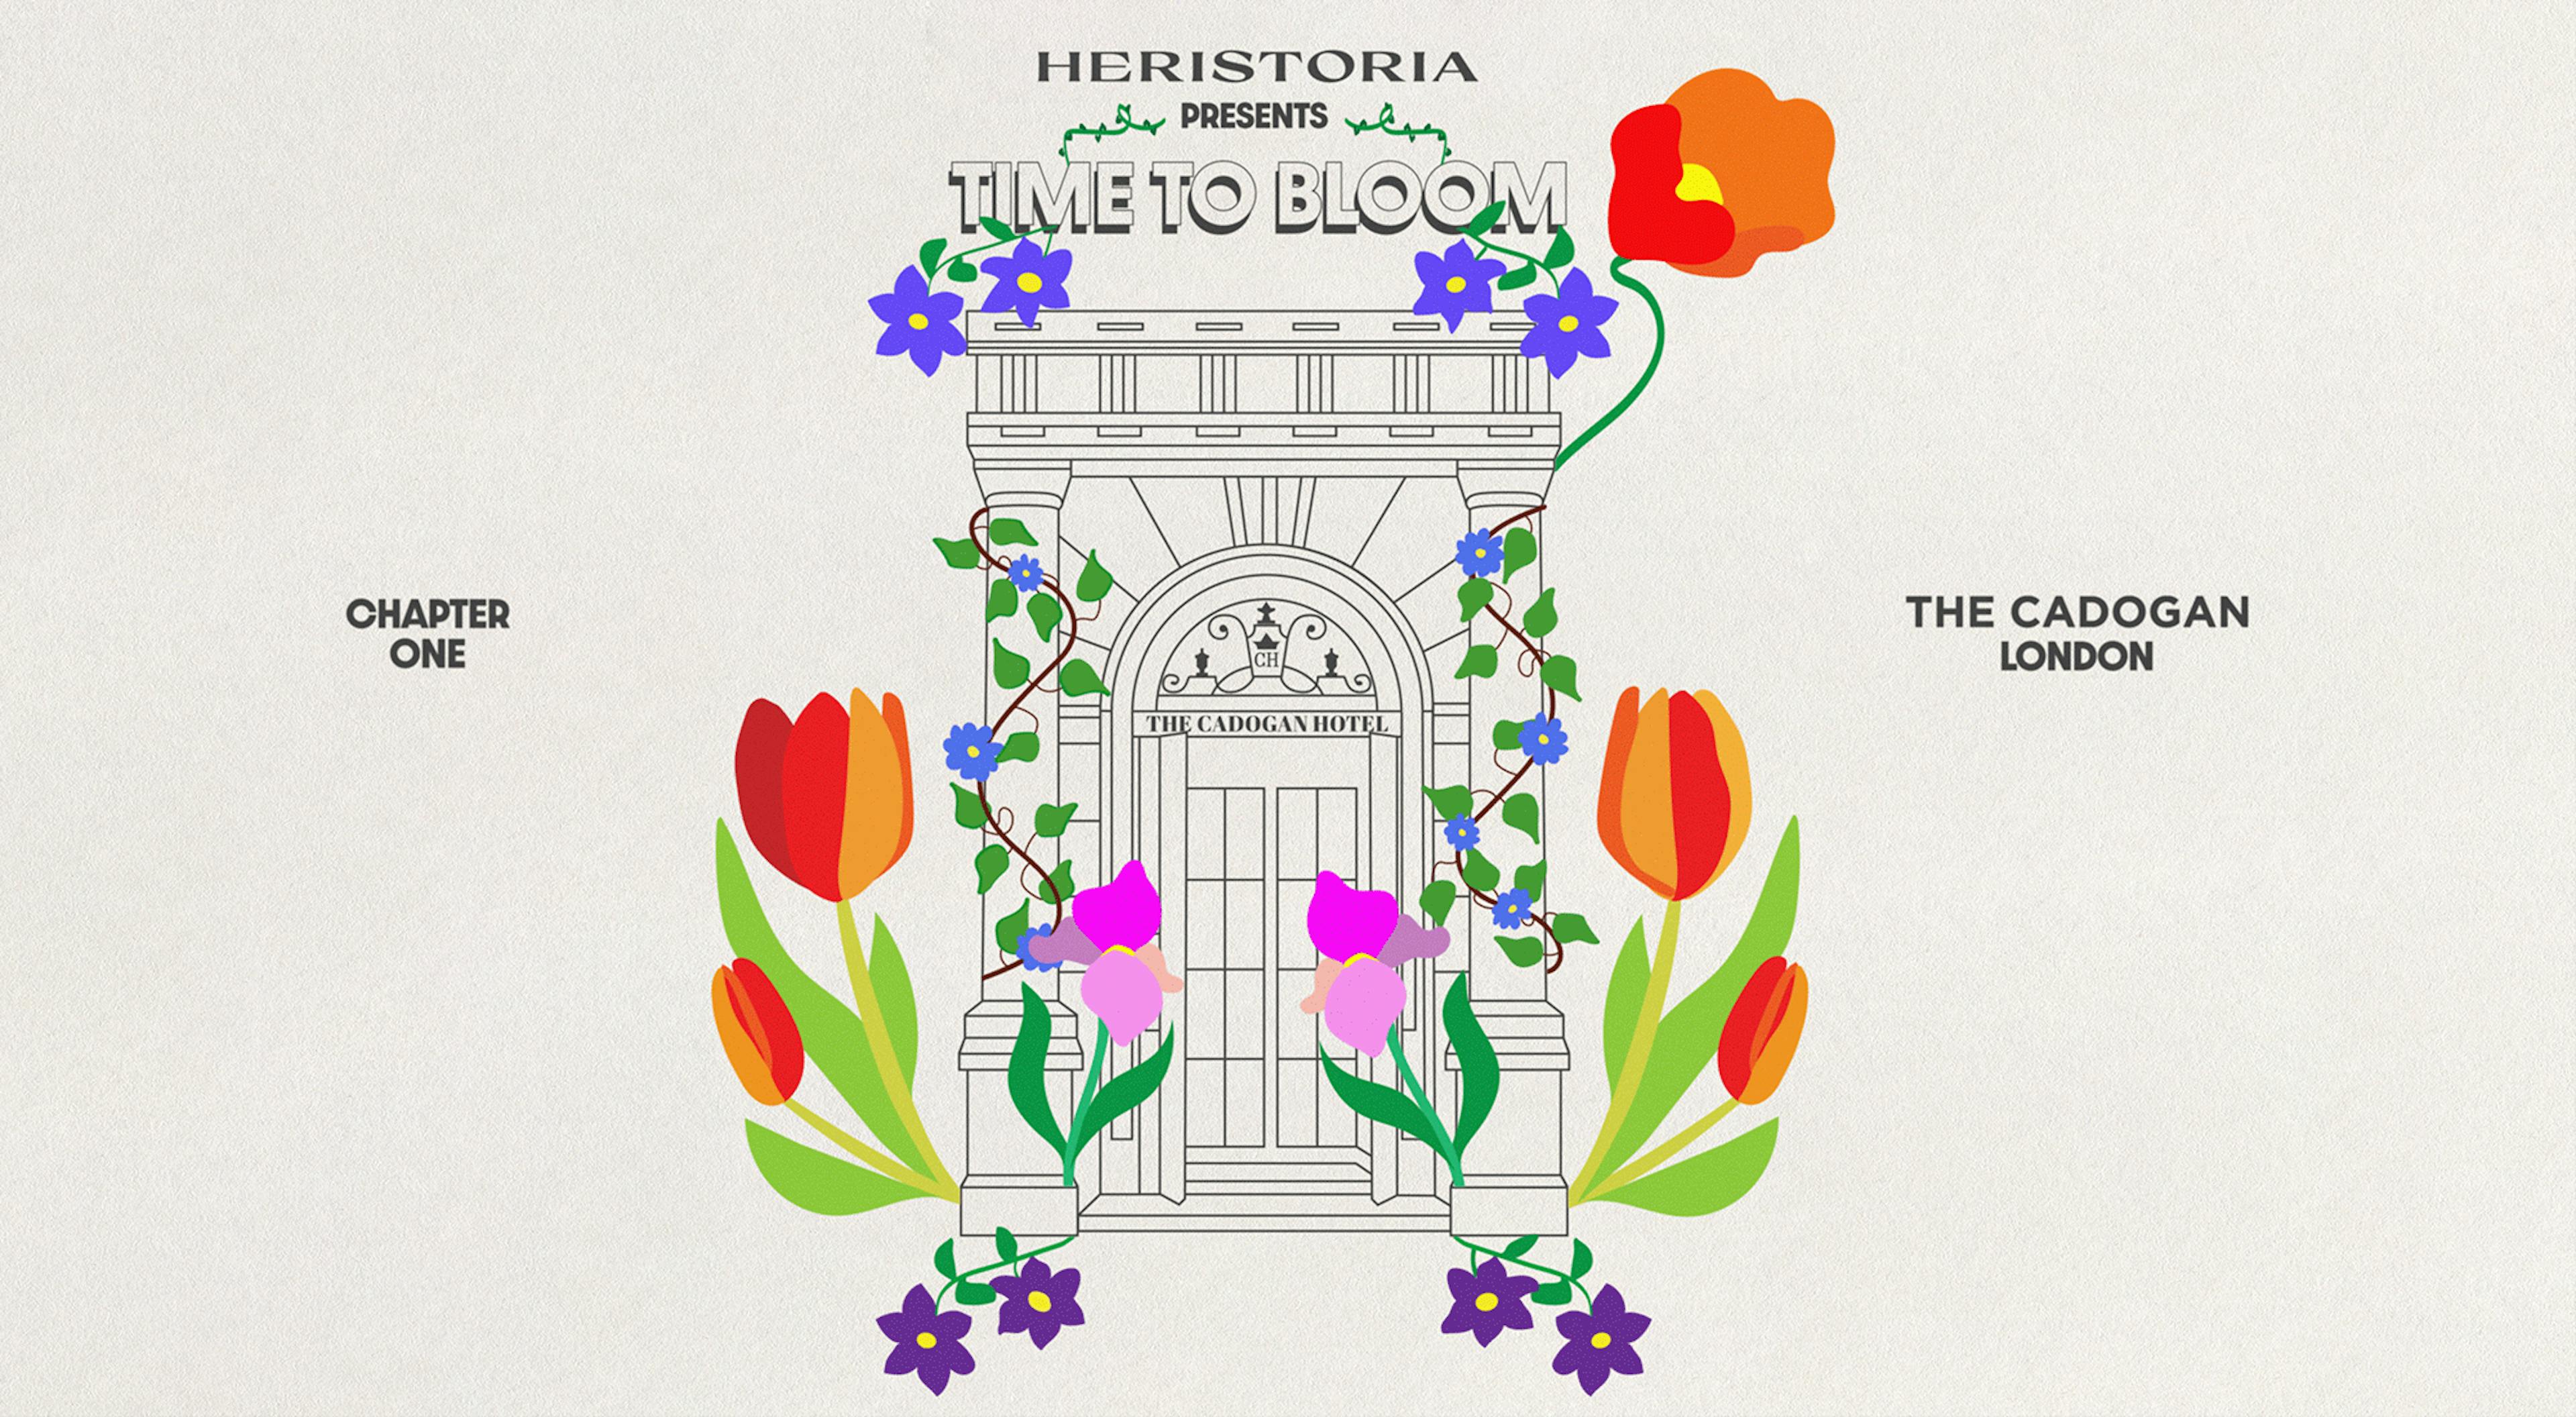 Cover - Heristoria presents “Time to Bloom” selection of vintage pieces in collaboration with The Cadogan, A Belmond Hotel